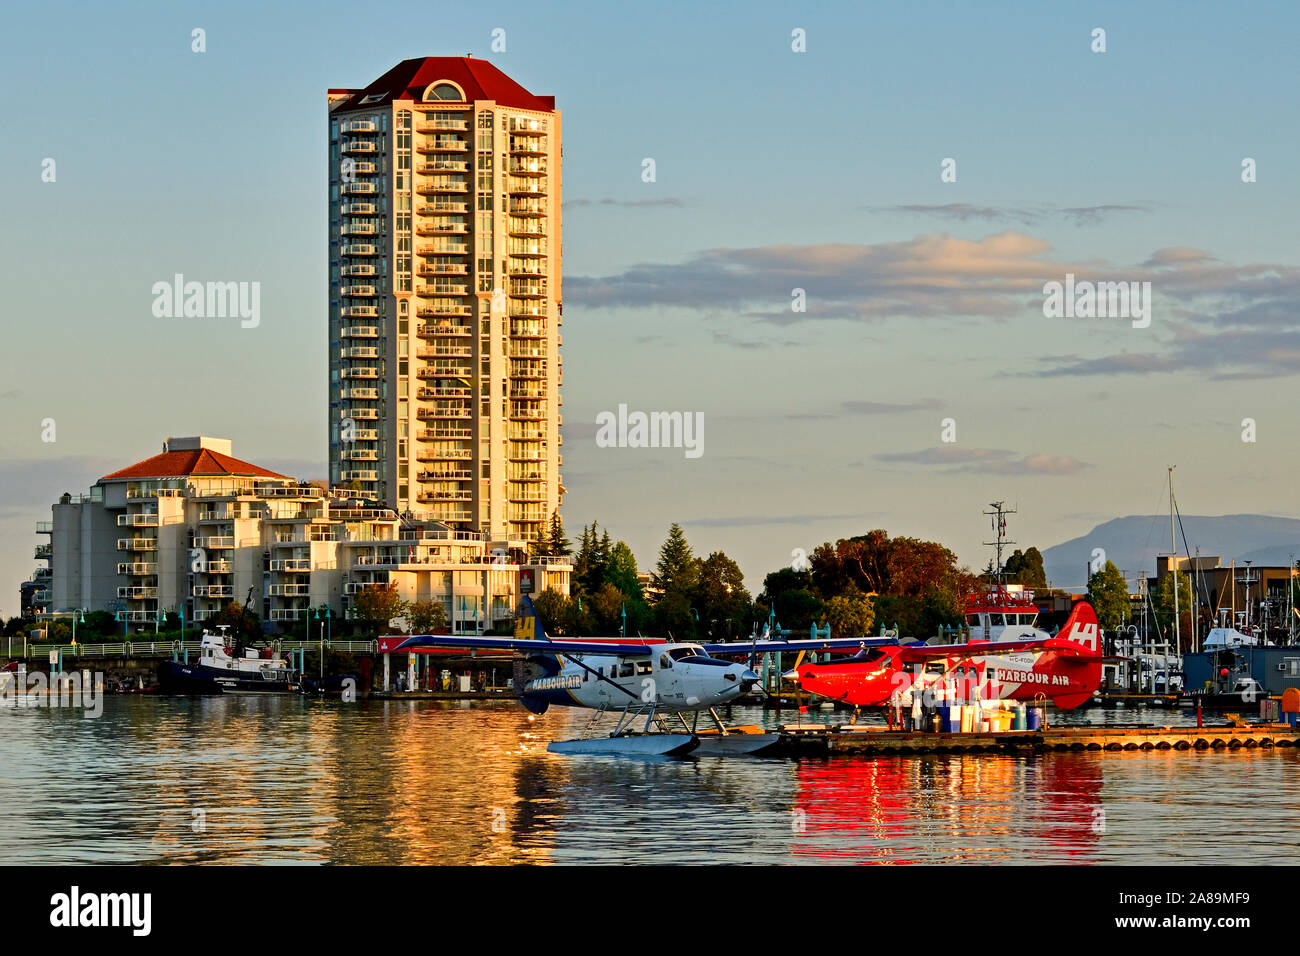 A landscape view in Nanaimo harbor with the airplane dock and tall condo buildings in the background Stock Photo